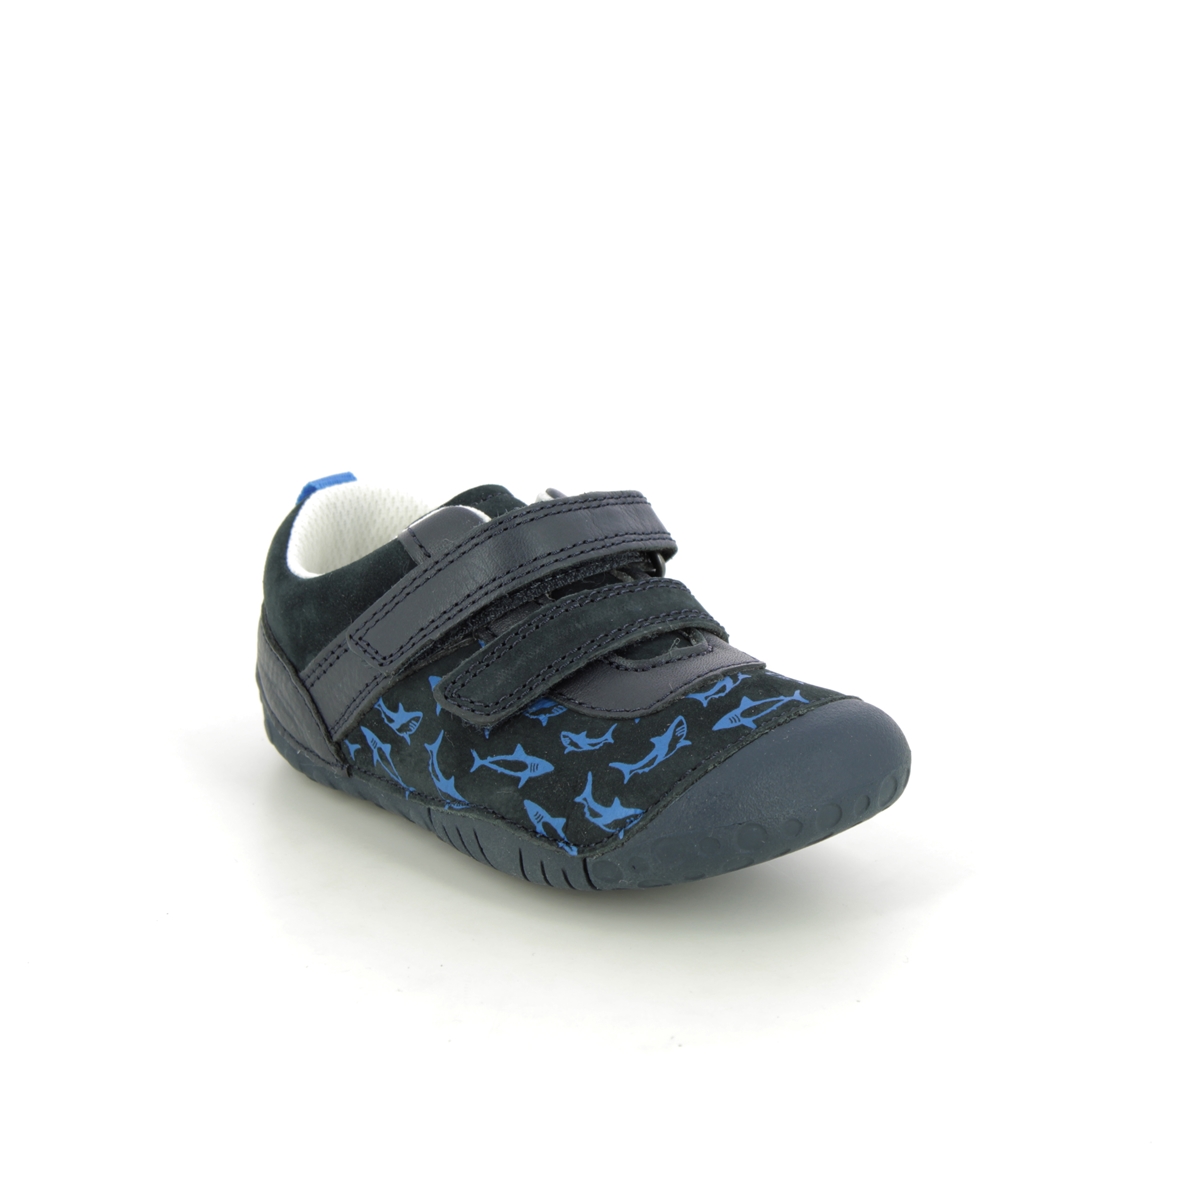 Start Rite - Little Fin In Navy Leather 0777-96F In Size 3.5 In Plain Navy Leather Boys First And Toddler Shoes  In Navy Leather For kids